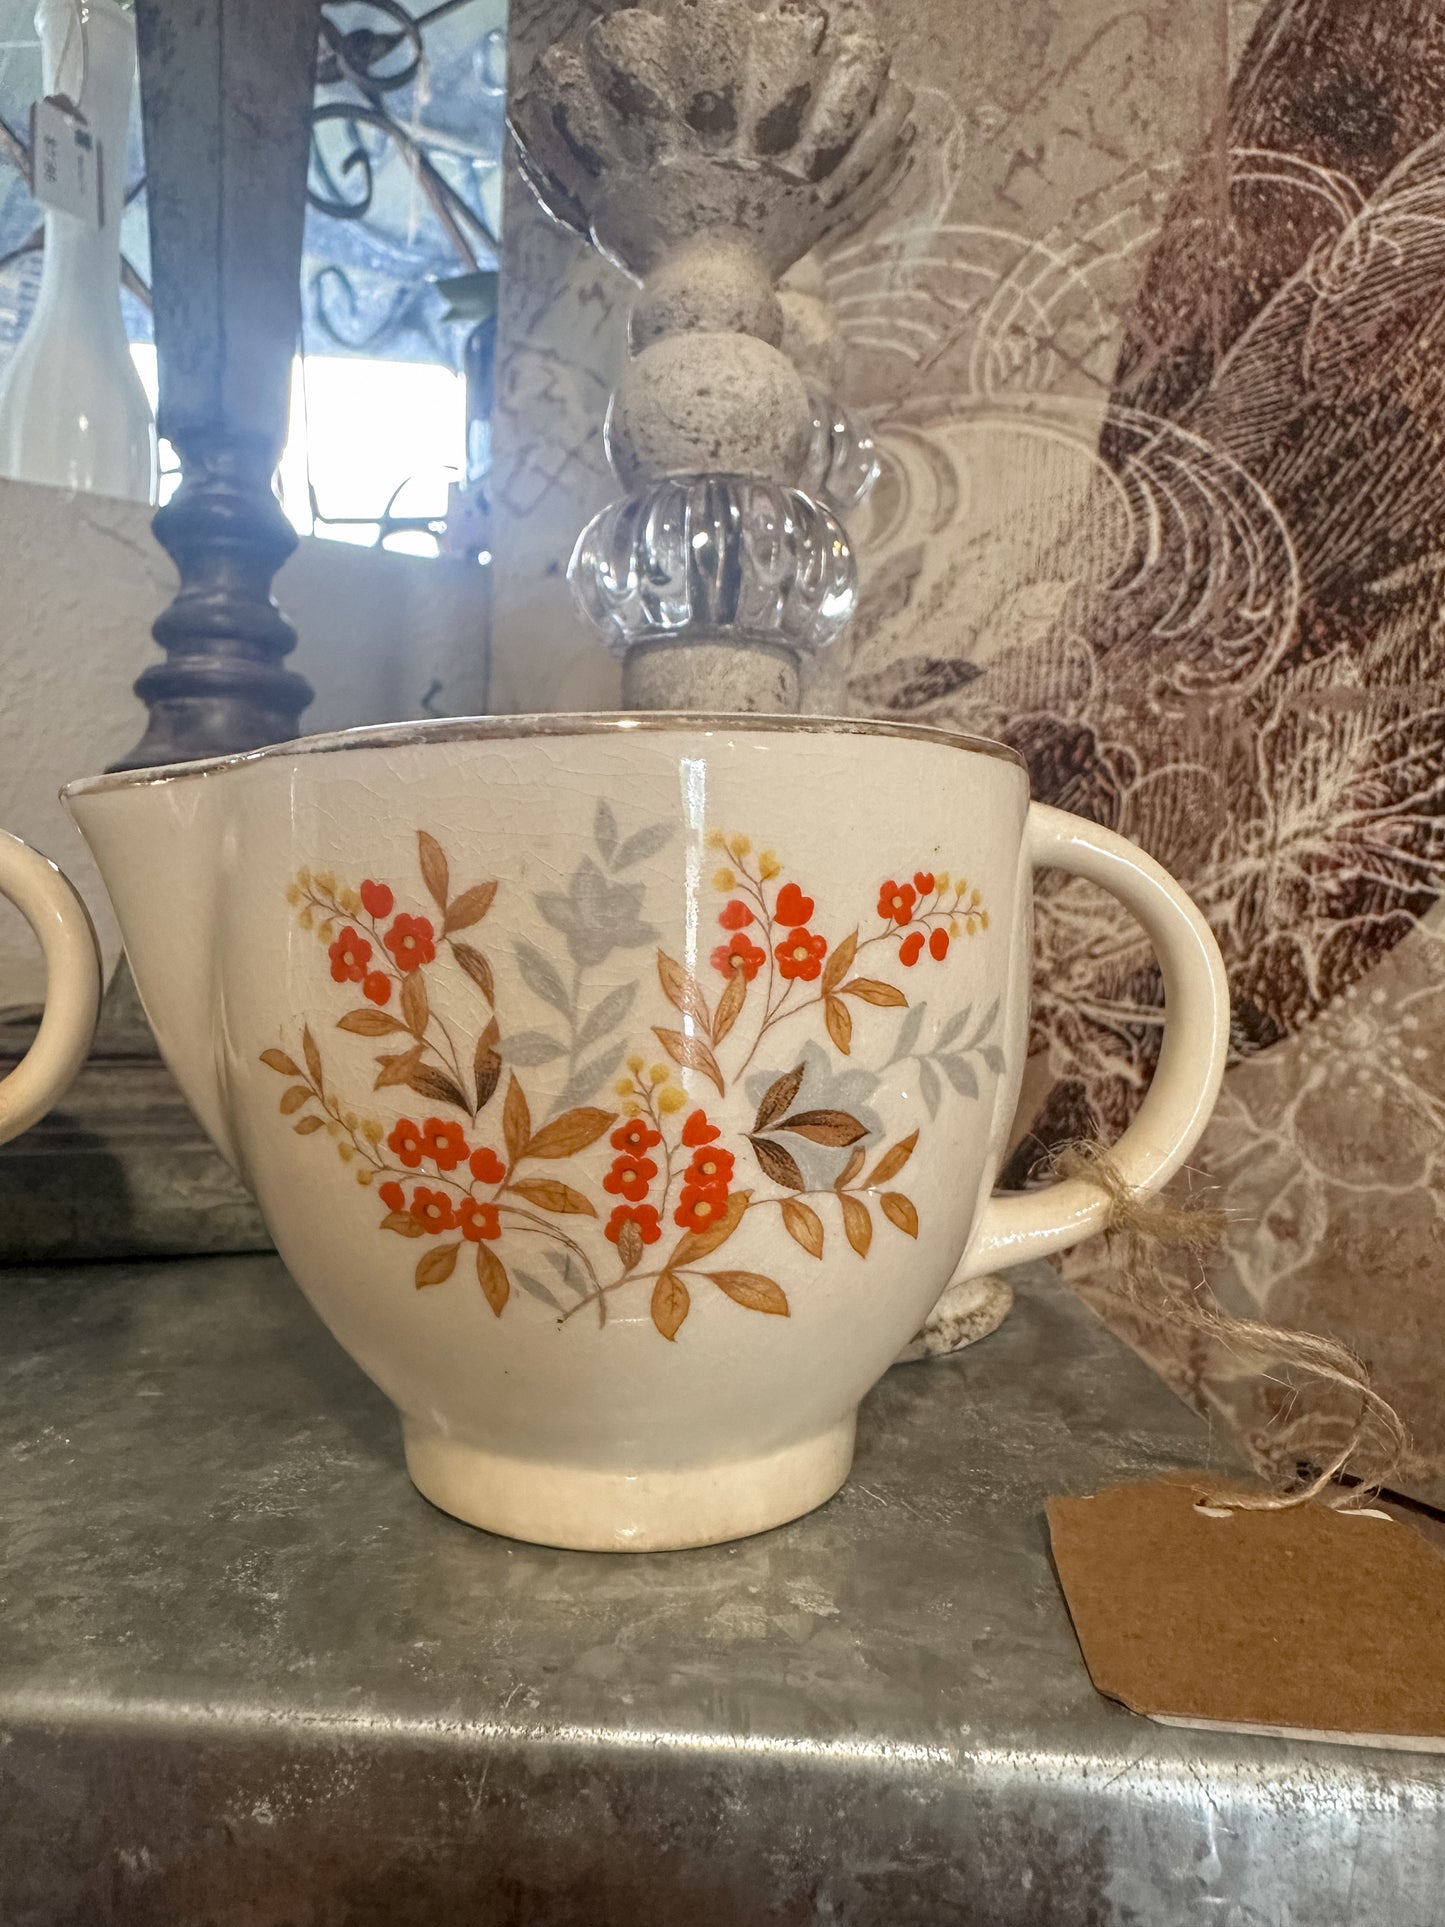 Vintage Sugar & Creamer Set-Stained & Crazed Beautifully! Video included